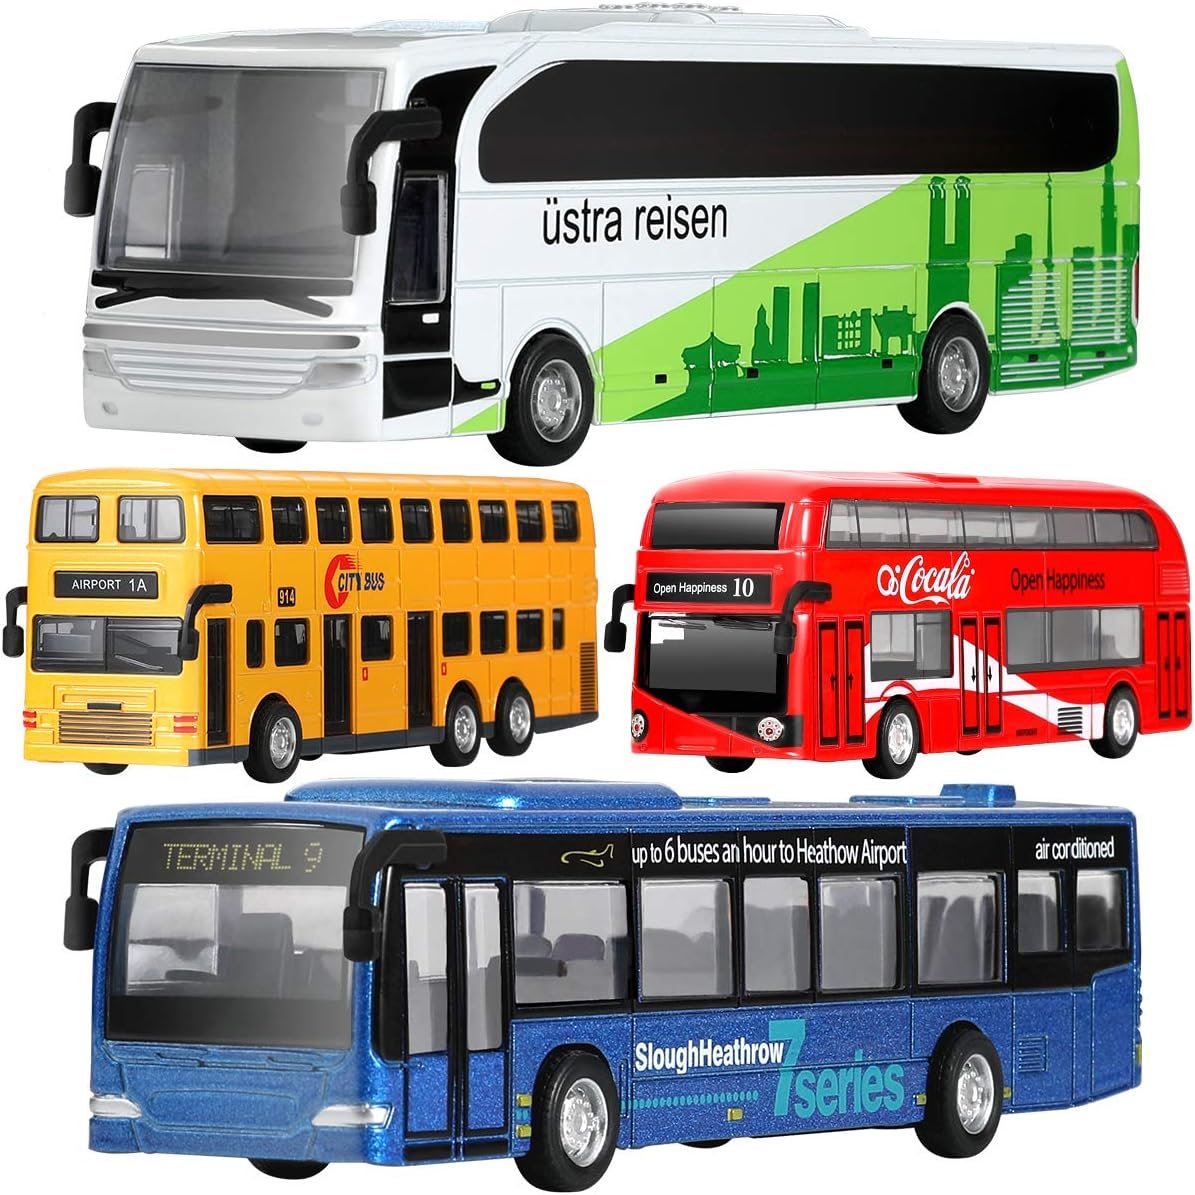 Geyiie Bus Toys Cars Set, Kids Die-Cast Metal Cars for Boy Girls 3-8 Years Old Pull Back Car City Bus 1:80 Scale Double Decker London Vehicles, Friction Powered Cars Play Toys Gift, 4 Pack